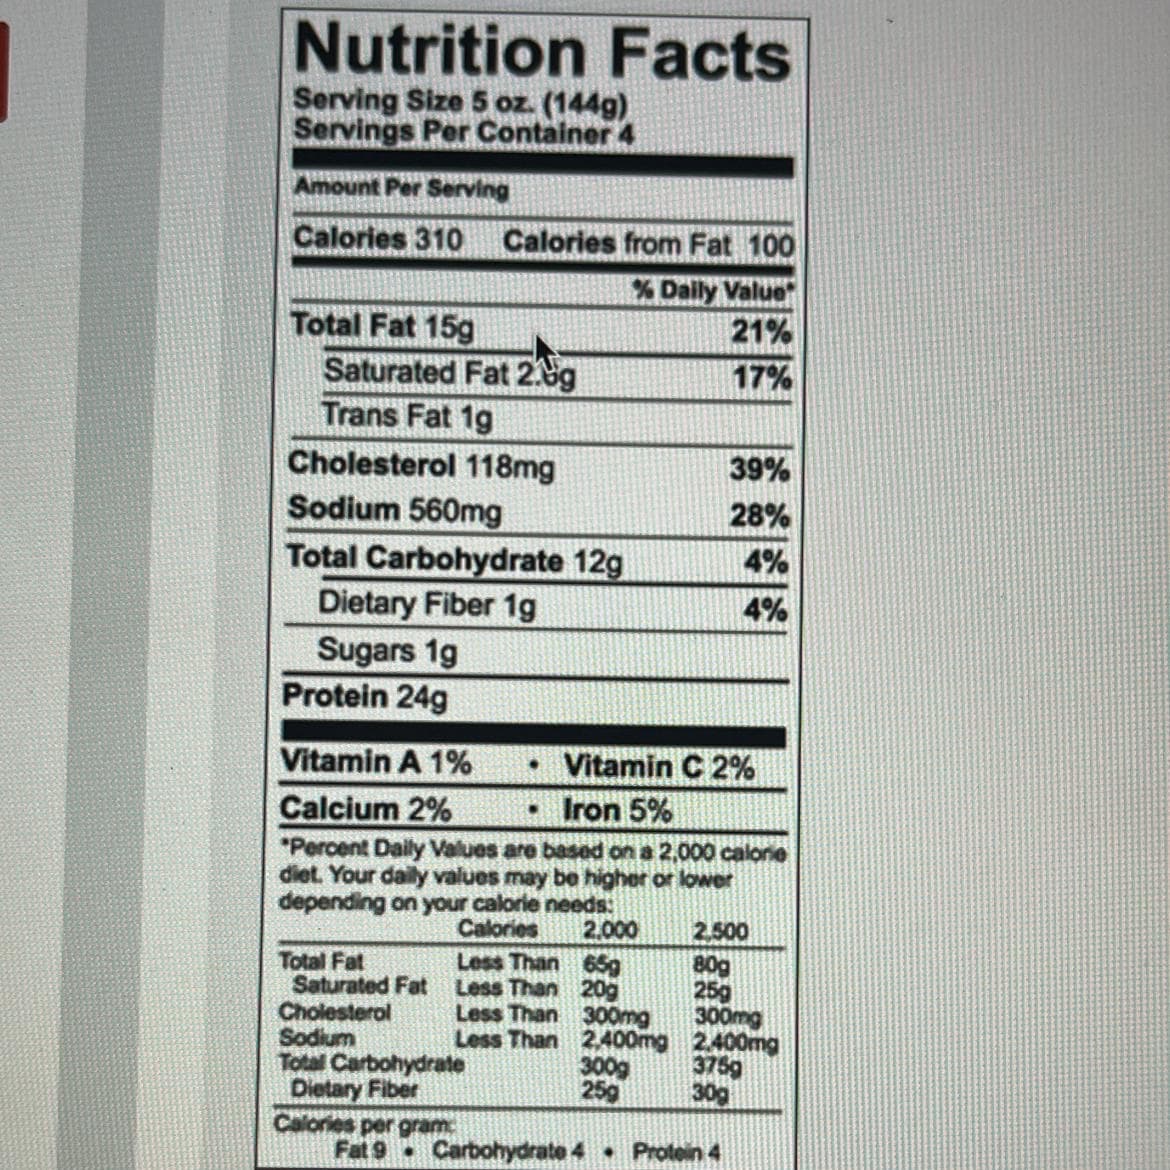 Nutrition Facts
Serving Size 5 oz. (144g)
Servings Per Container 4
Amount Per Serving
Calories 310 Calories from Fat 100
% Daily Value
21%
17%
Total Fat 15g
Saturated Fat 2.0g
Fat 2.g
Trans Fat 1g
Cholesterol 118mg
Sodium 560mg
Total Carbohydrate 12g
Dietary Fiber 1g
Sugars 1g
Protein 24g
Vitamin A 1%
• Vitamin C 2%
Calcium 2%
• Iron 5%
"Percent Daily Values are based on a 2,000 calorie
diet. Your daily values may be higher or lower
depending on your calorie needs:
Calories
2,000
Less Than 65g
Less Than
20g
Less Than
Less Than
Total Fat
Saturated Fat
Cholesterol
Sodium
Total Carbohydrate
Dietary Fiber
Calories per gram
300mg
2,400mg
300g
25g
39%
28%
4%
4%
2.500
80g
25g
300mg
2.400mg
375g
30g
Fat 9 Carbohydrate 4 Protein 4